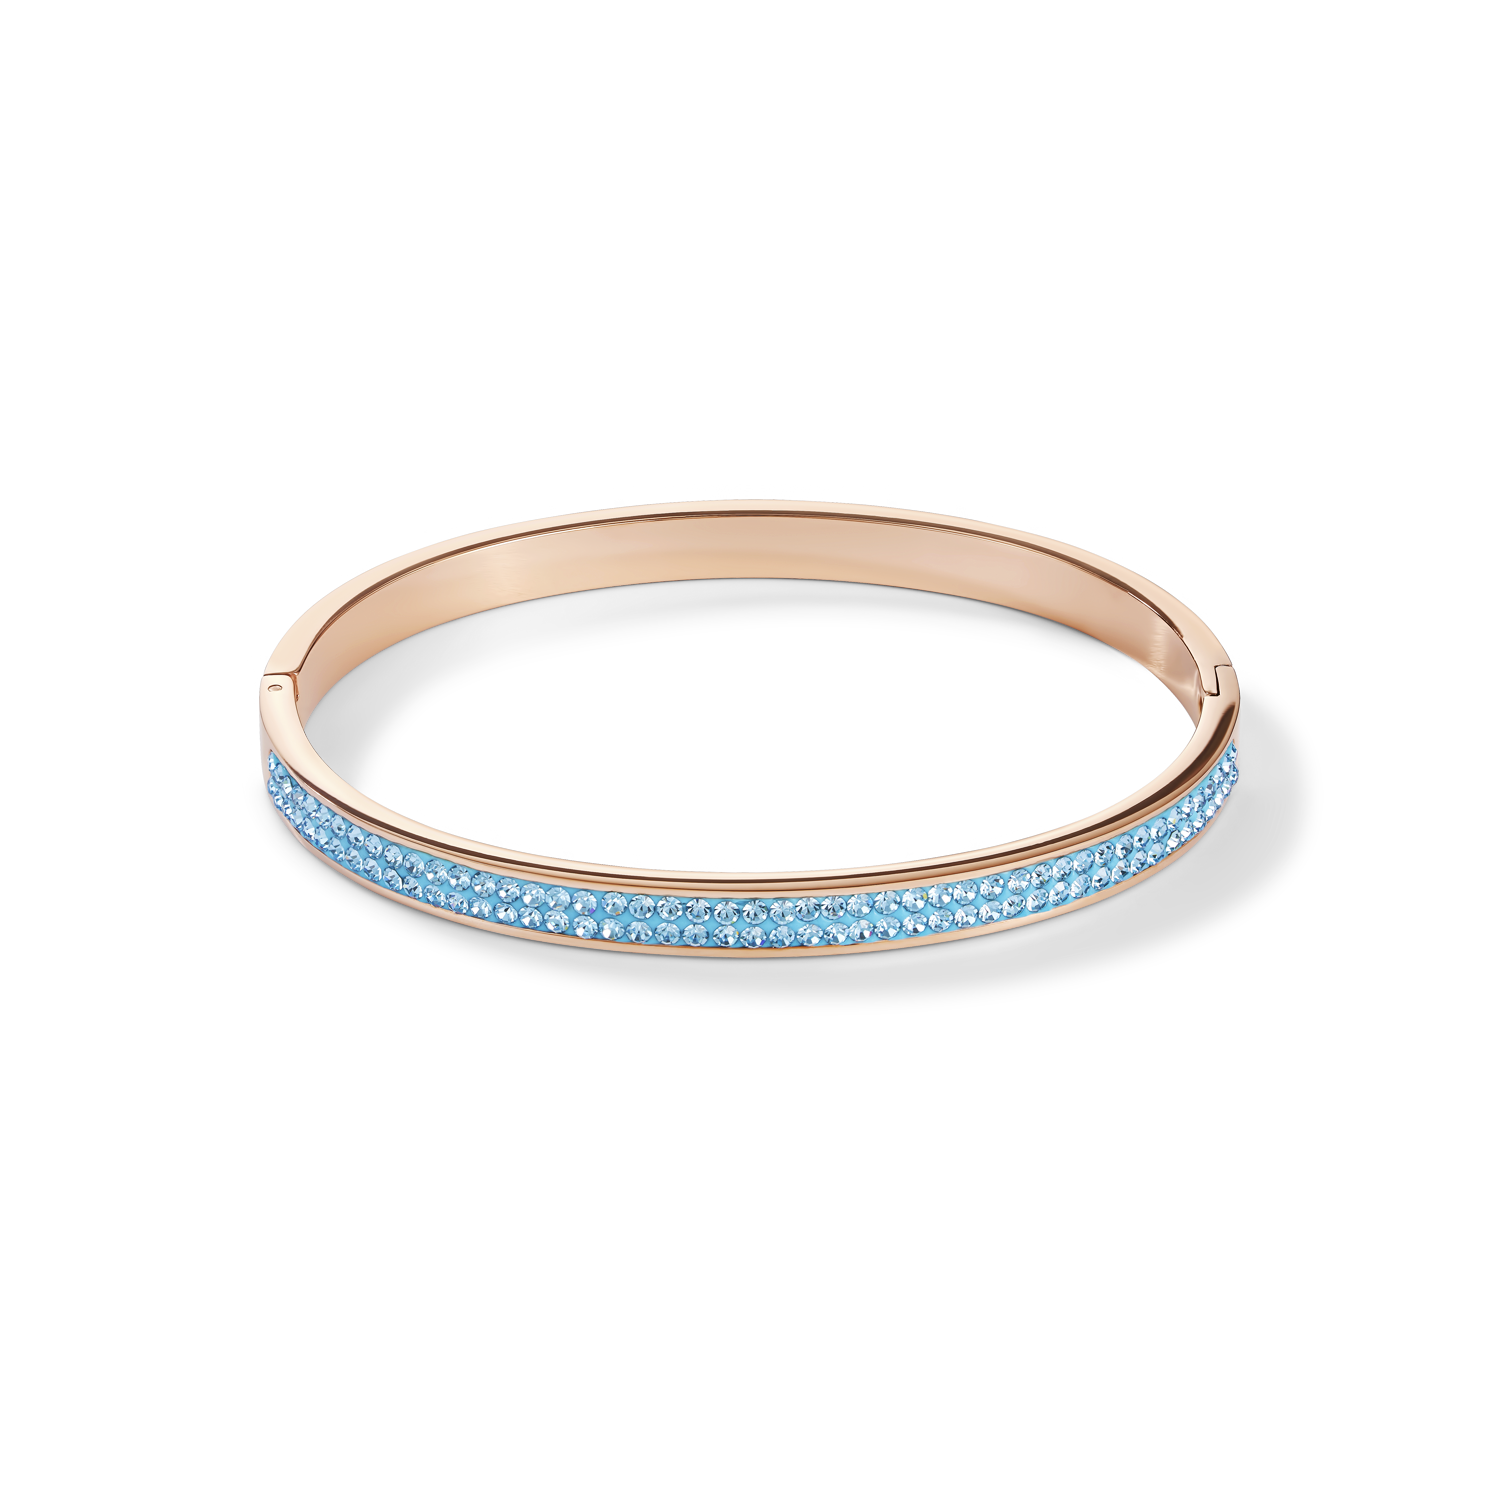 Bangle stainless steel rose gold & crystals pavé aqua